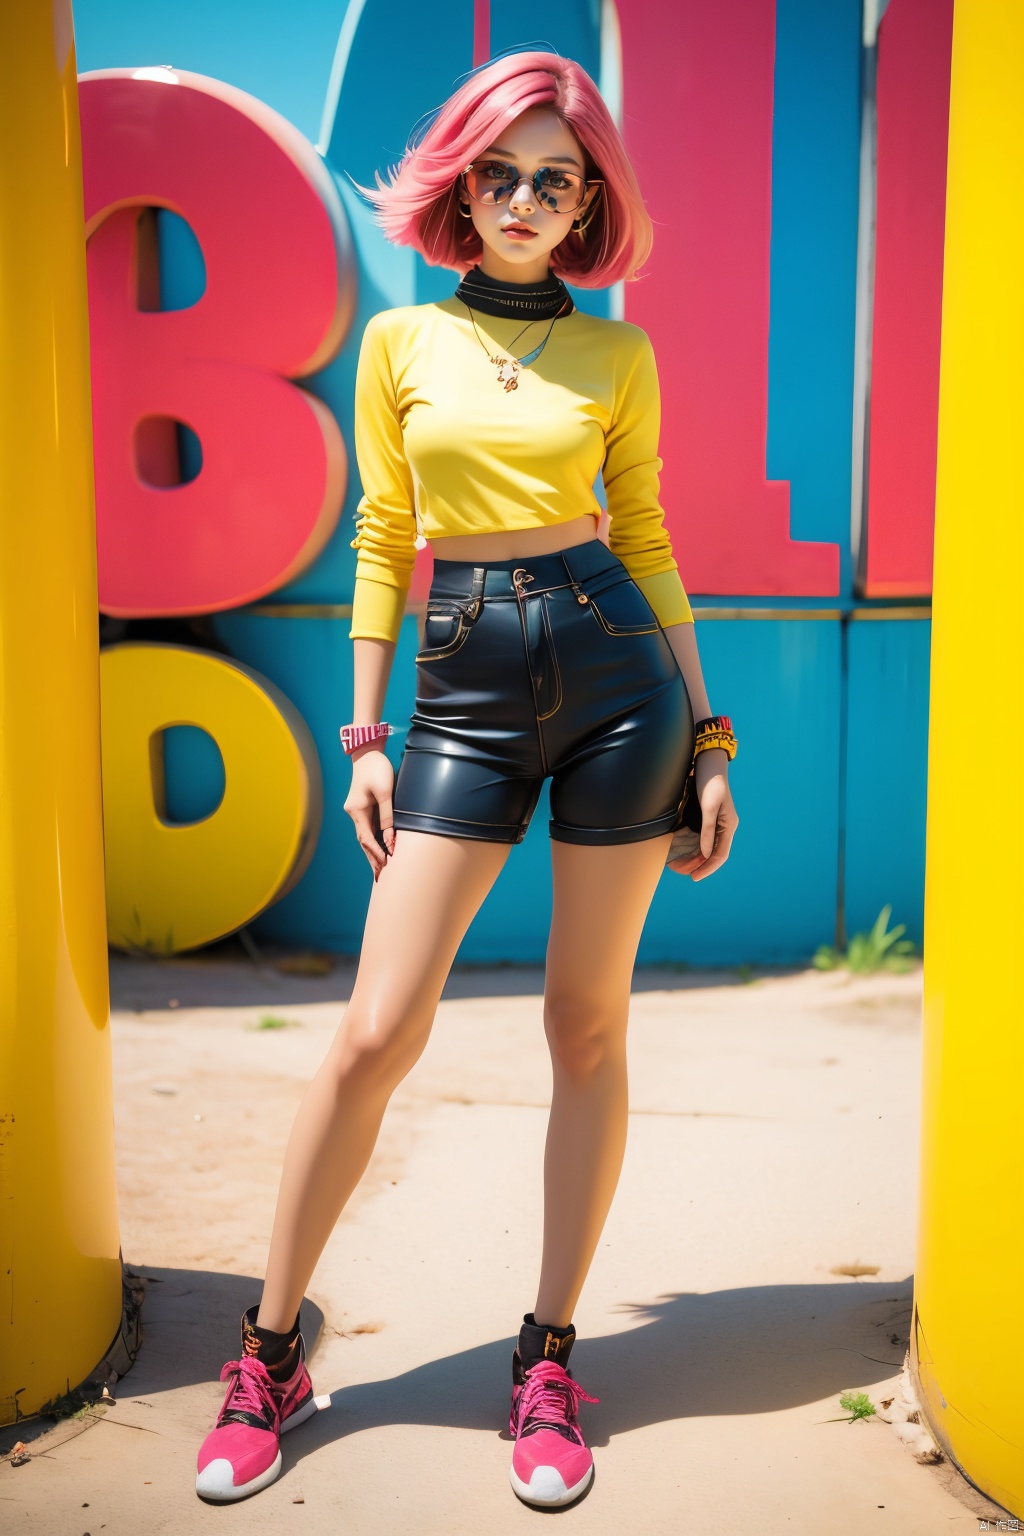 A fashionable young girl taking photos in the sunny weather, wearing trendy clothes, with a background of Memphis-style photography elements, featuring bright colors and artistic vibes. High-definition photo of a trendy girl in vibrant Memphis-style setting under the sun, full of lively colors and youthful energy.